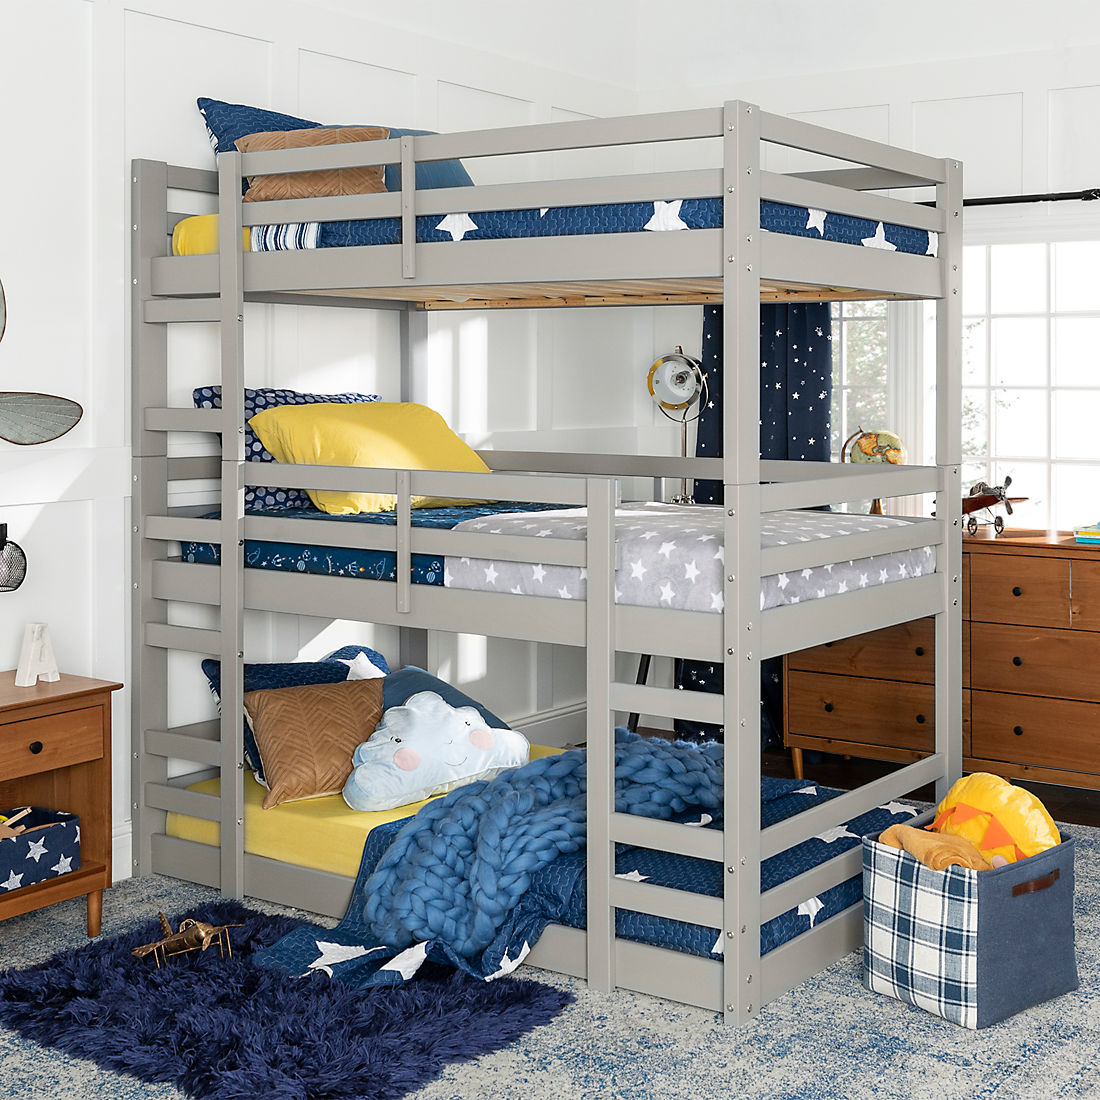 W Trends Solid Wood Triple Bunk Bed, Berkley Jensen Twin Size Bunk Bed With Trundle Assembly Instructions